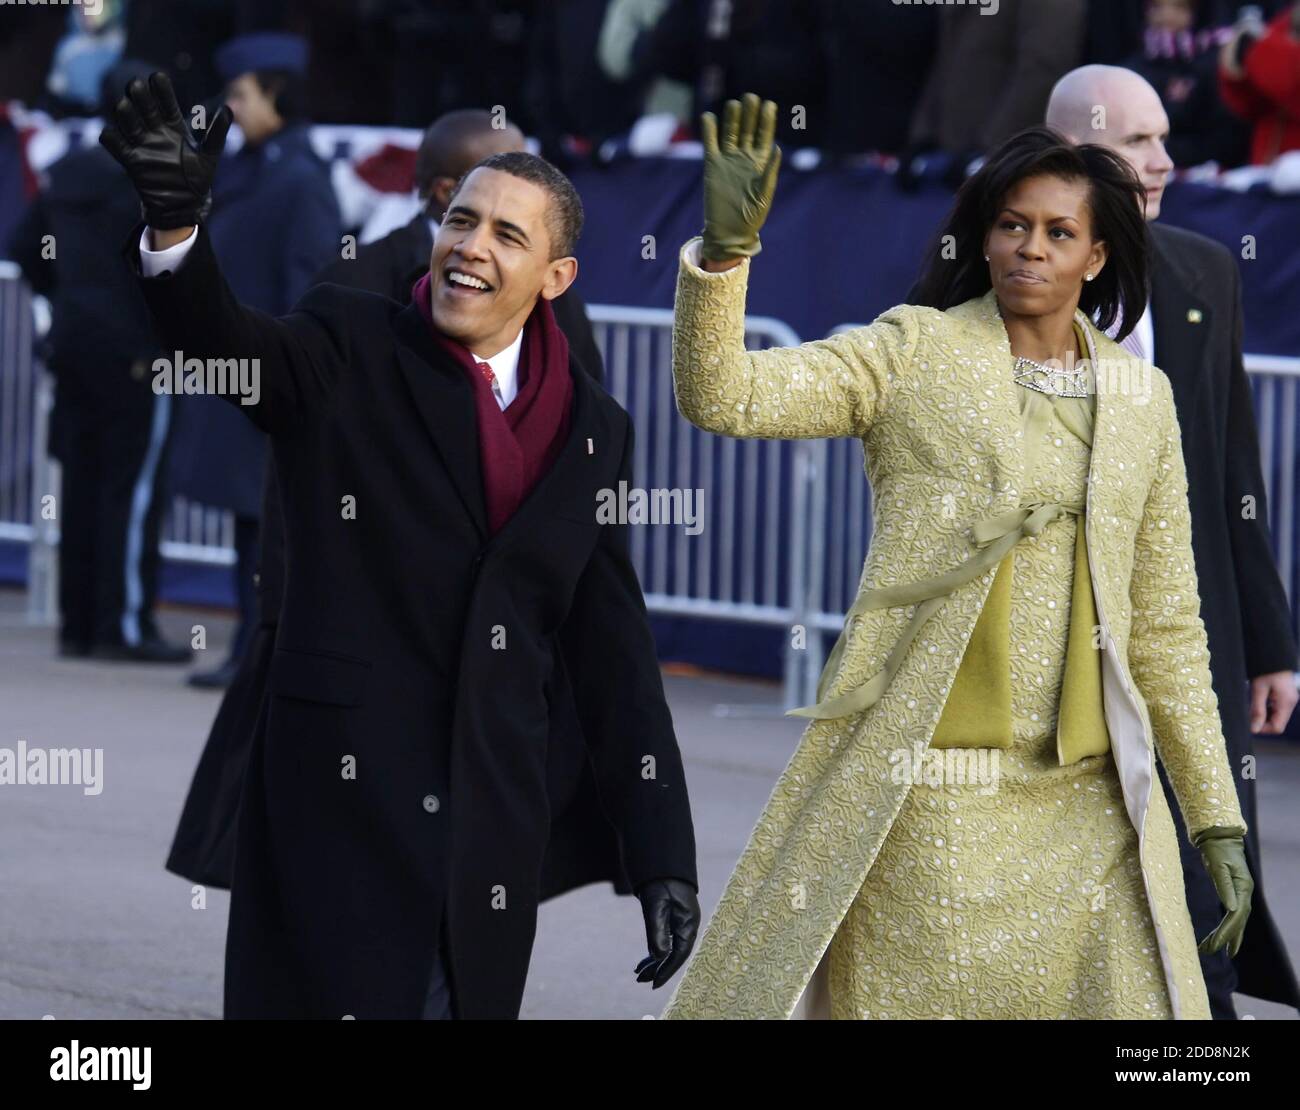 NO FILM, NO VIDEO, NO TV, NO DOCUMENTARY - President Barack Obama and wife, Michelle, walk along the parade route after he was sworn in as the 44th US President in Washington, D.C., USA, on January 20, 2009. Photo by Chuck Kennedy/MCT/ABACAPRESS.COM Stock Photo